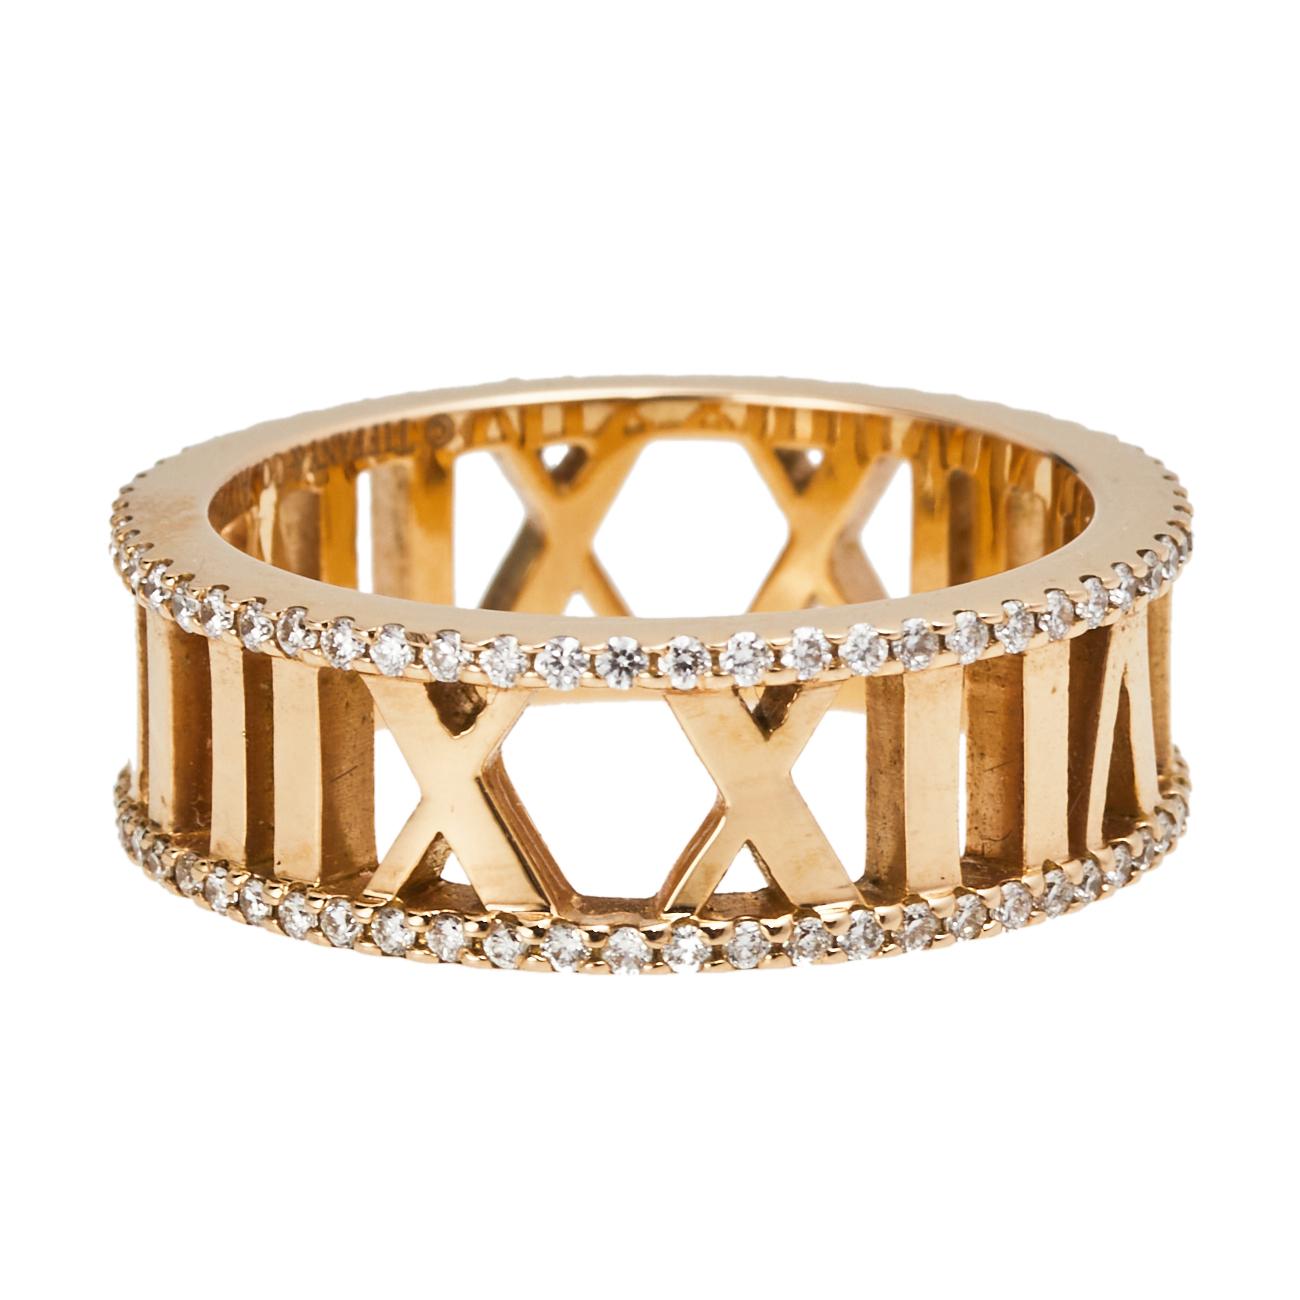 The Atlas collection by Tiffany & Co. was introduced in the year 1995 and it stands to embody the strength of this timeless brand. This ring is from that collection and it is so beautiful, it deserves to be on you. Made from 18k rose gold, the ring